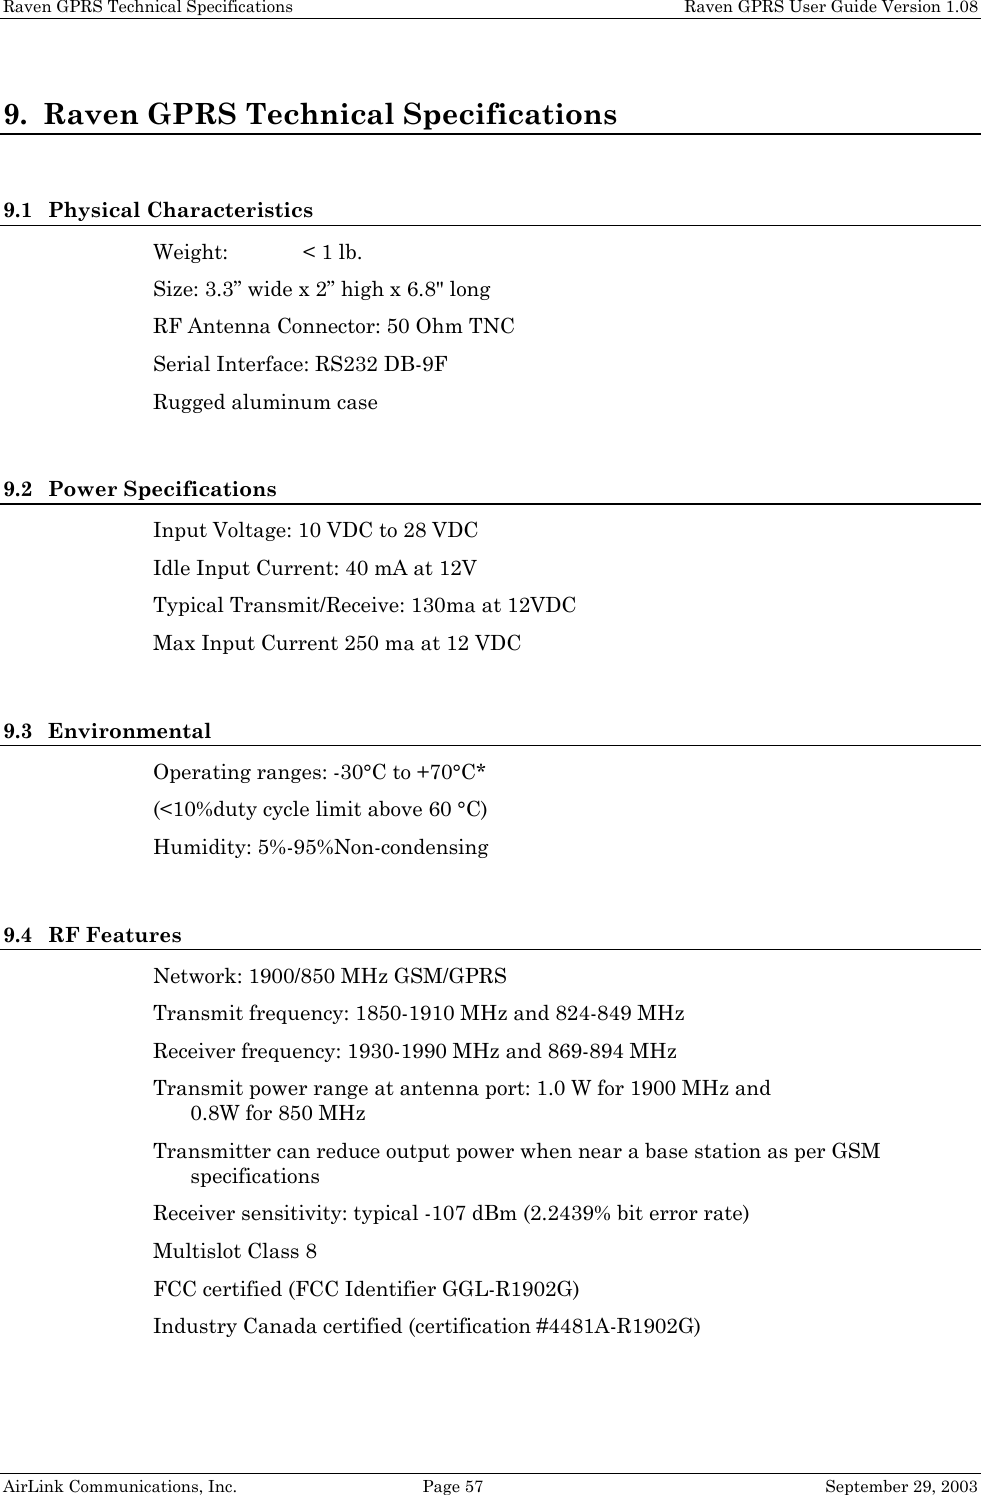 Raven GPRS Technical Specifications    Raven GPRS User Guide Version 1.08 AirLink Communications, Inc.  Page 57  September 29, 2003 9. Raven GPRS Technical Specifications  9.1 Physical Characteristics Weight:  &lt; 1 lb. Size: 3.3” wide x 2” high x 6.8&quot; long  RF Antenna Connector: 50 Ohm TNC Serial Interface: RS232 DB-9F Rugged aluminum case  9.2 Power Specifications Input Voltage: 10 VDC to 28 VDC Idle Input Current: 40 mA at 12V Typical Transmit/Receive: 130ma at 12VDC Max Input Current 250 ma at 12 VDC  9.3 Environmental Operating ranges: -30°C to +70°C* (&lt;10%duty cycle limit above 60 °C) Humidity: 5%-95%Non-condensing  9.4 RF Features Network: 1900/850 MHz GSM/GPRS Transmit frequency: 1850-1910 MHz and 824-849 MHz Receiver frequency: 1930-1990 MHz and 869-894 MHz Transmit power range at antenna port: 1.0 W for 1900 MHz and  0.8W for 850 MHz Transmitter can reduce output power when near a base station as per GSM specifications Receiver sensitivity: typical -107 dBm (2.2439% bit error rate) Multislot Class 8 FCC certified (FCC Identifier GGL-R1902G) Industry Canada certified (certification #4481A-R1902G) 